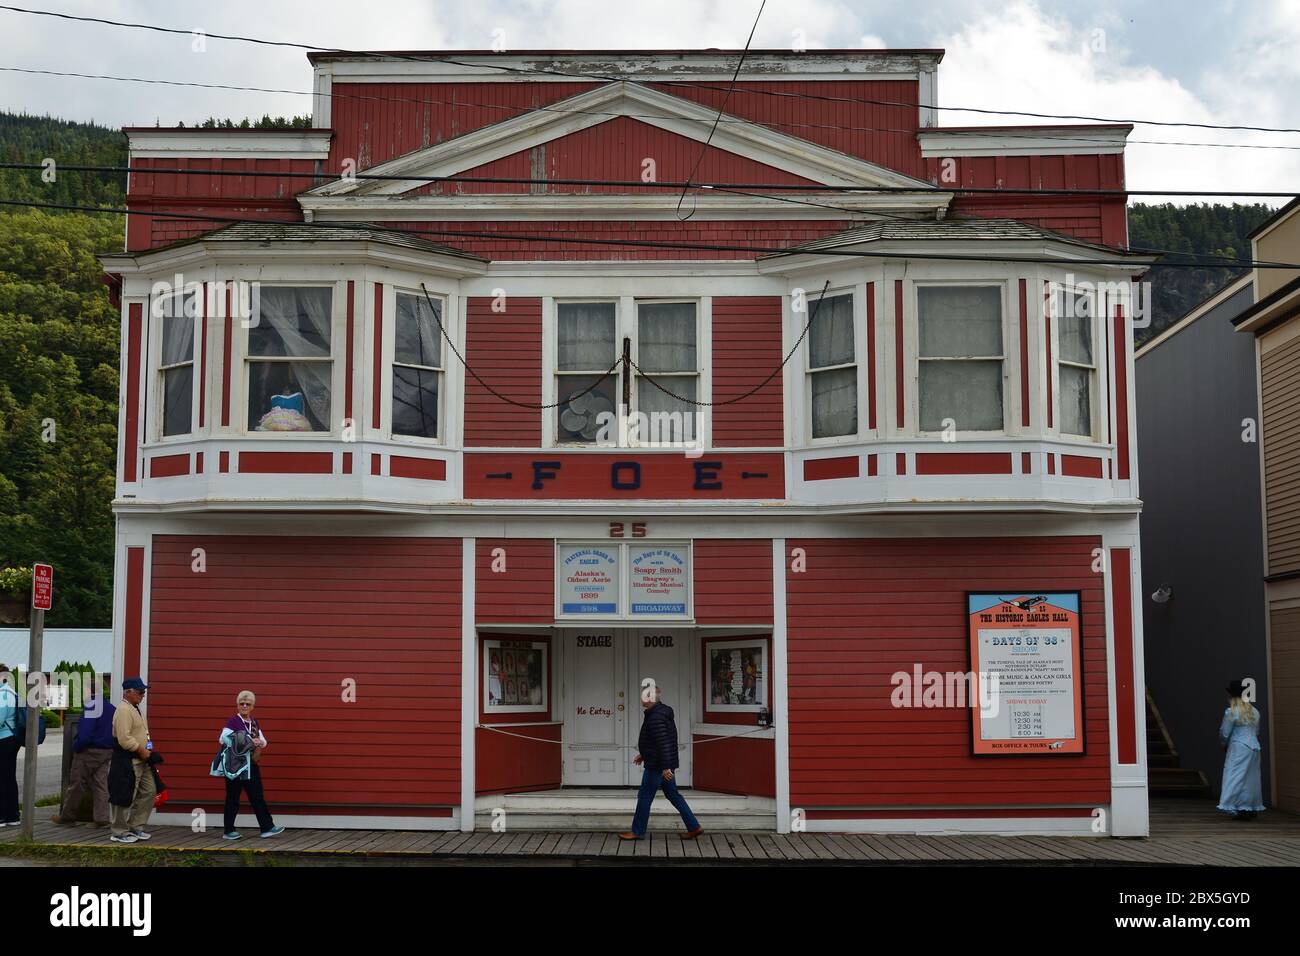 Home to the Days of 98 show, all about Jefferson Randolf 'Soapy' Smith, The Historic Eagles hall, Skagway, Alaska, USA, August 2019. Stock Photo